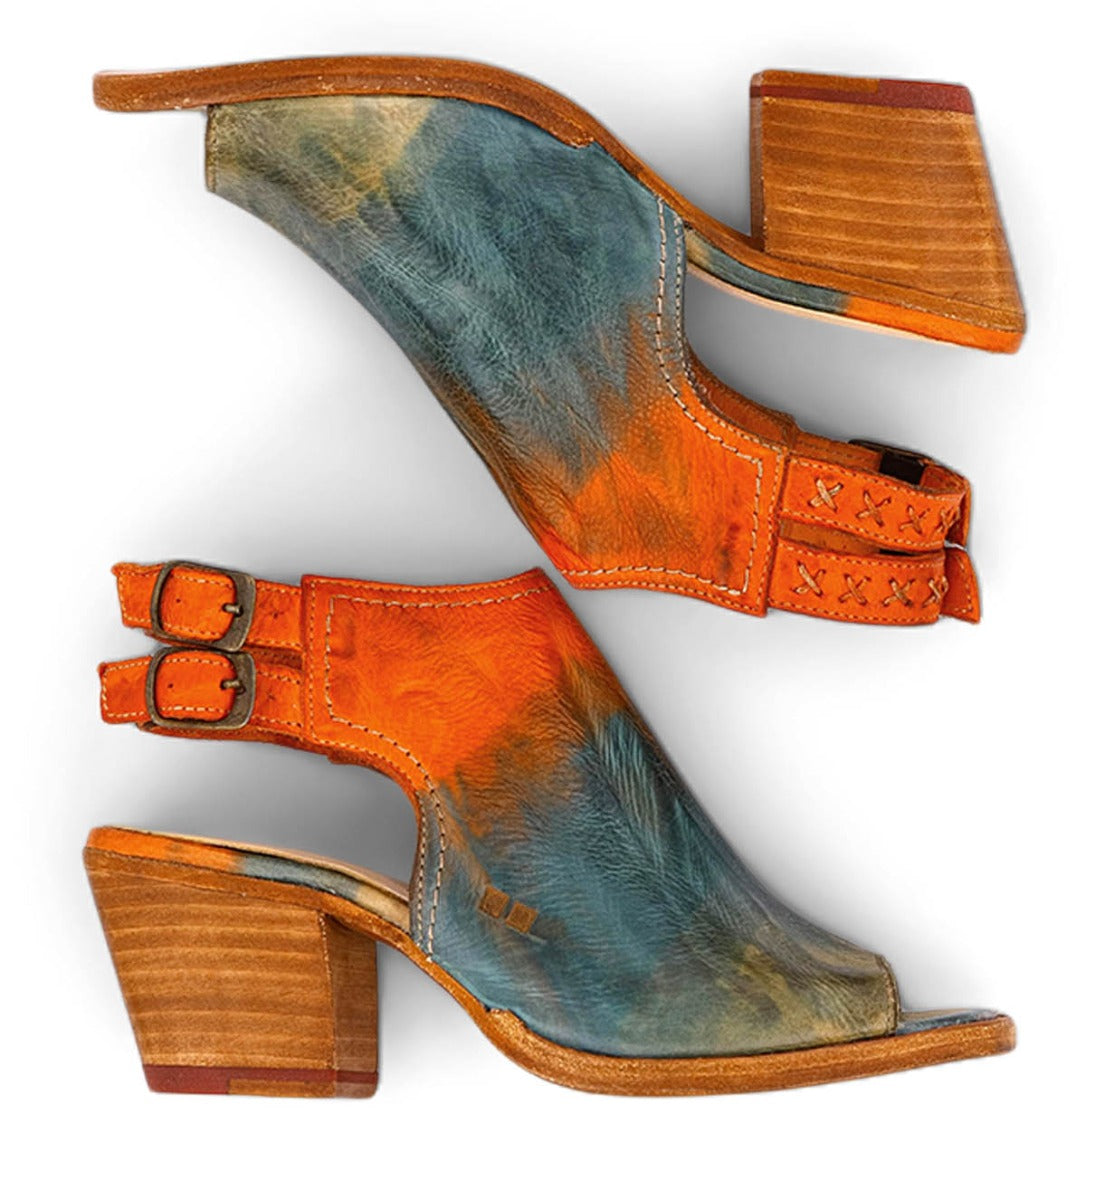 A pair of Ireni sandals in orange and blue with a wooden heel by Bed Stu.